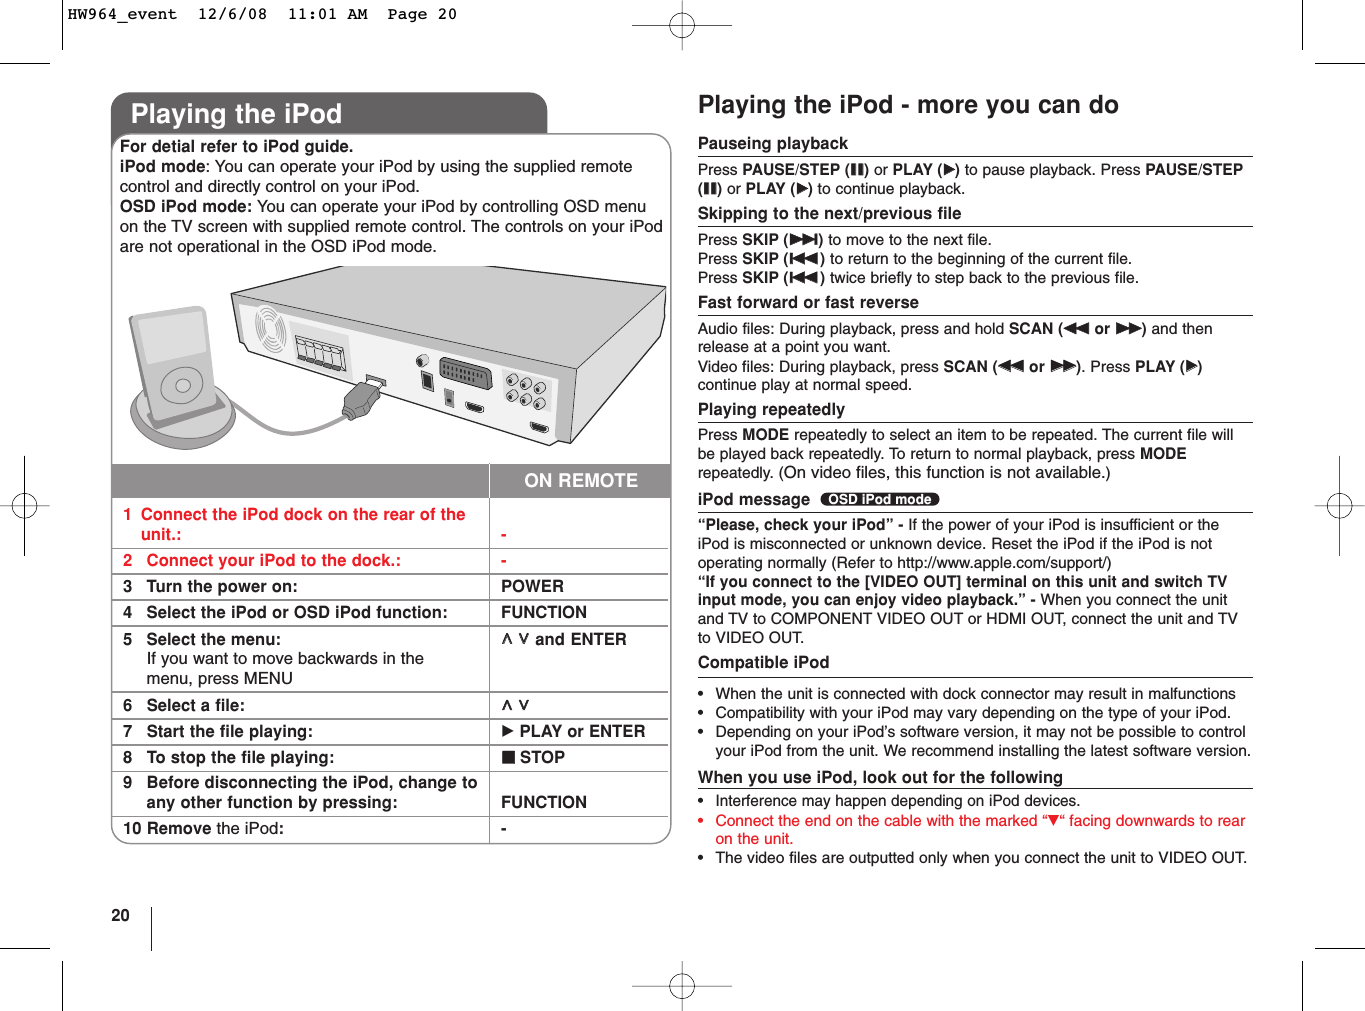 20Playing the iPod - more you can doPauseing playbackPress PAUSE/STEP (XX)or PLAY (BB)to pause playback. Press PAUSE/STEP(XX)or PLAY (BB)to continue playback.Skipping to the next/previous filePress SKIP (&gt;&gt;)to move to the next file.Press SKIP (..)to return to the beginning of the current file. Press SKIP (..)twice briefly to step back to the previous file.Fast forward or fast reverseAudio files: During playback, press and hold SCAN (mmor MM)and thenrelease at a point you want.Video files: During playback, press SCAN (mmor MM). Press PLAY (BB)continue play at normal speed.Playing repeatedlyPress MODE repeatedly to select an item to be repeated. The current file willbe played back repeatedly. To return to normal playback, press MODErepeatedly. (On video files, this function is not available.)iPod message  “Please, check your iPod” - If the power of your iPod is insufficient or theiPod is misconnected or unknown device. Reset the iPod if the iPod is notoperating normally (Refer to http://www.apple.com/support/)“If you connect to the [VIDEO OUT] terminal on this unit and switch TVinput mode, you can enjoy video playback.” - When you connect the unitand TV to COMPONENT VIDEO OUT or HDMI OUT, connect the unit and TVto VIDEO OUT.Compatible iPod•When the unit is connected with dock connector may result in malfunctions•Compatibility with your iPod may vary depending on the type of your iPod. •Depending on your iPod’s software version, it may not be possible to controlyour iPod from the unit. We recommend installing the latest software version.When you use iPod, look out for the following•Interference may happen depending on iPod devices.•Connect the end on the cable with the marked “V“ facing downwards to rearon the unit.•The video files are outputted only when you connect the unit to VIDEO OUT.OSD iPod modePlaying the iPod1Connect the iPod dock on the rear of the unit.: -2Connect your iPod to the dock.: -3Turn the power on:  POWER4Select the iPod or OSD iPod function:  FUNCTION5Select the menu: UU  uuand ENTERIf you want to move backwards in the menu, press MENU6Select a file: UU  uu7Start the file playing: BPLAY or ENTER8To stop the file playing: xxSTOP9Before disconnecting the iPod, change to any other function by pressing: FUNCTION10 Remove the iPod:-For detial refer to iPod guide.iPod mode: You can operate your iPod by using the supplied remotecontrol and directly control on your iPod.OSD iPod mode: You can operate your iPod by controlling OSD menuon the TV screen with supplied remote control. The controls on your iPodare not operational in the OSD iPod mode.ON REMOTEHW964_event  12/6/08  11:01 AM  Page 20